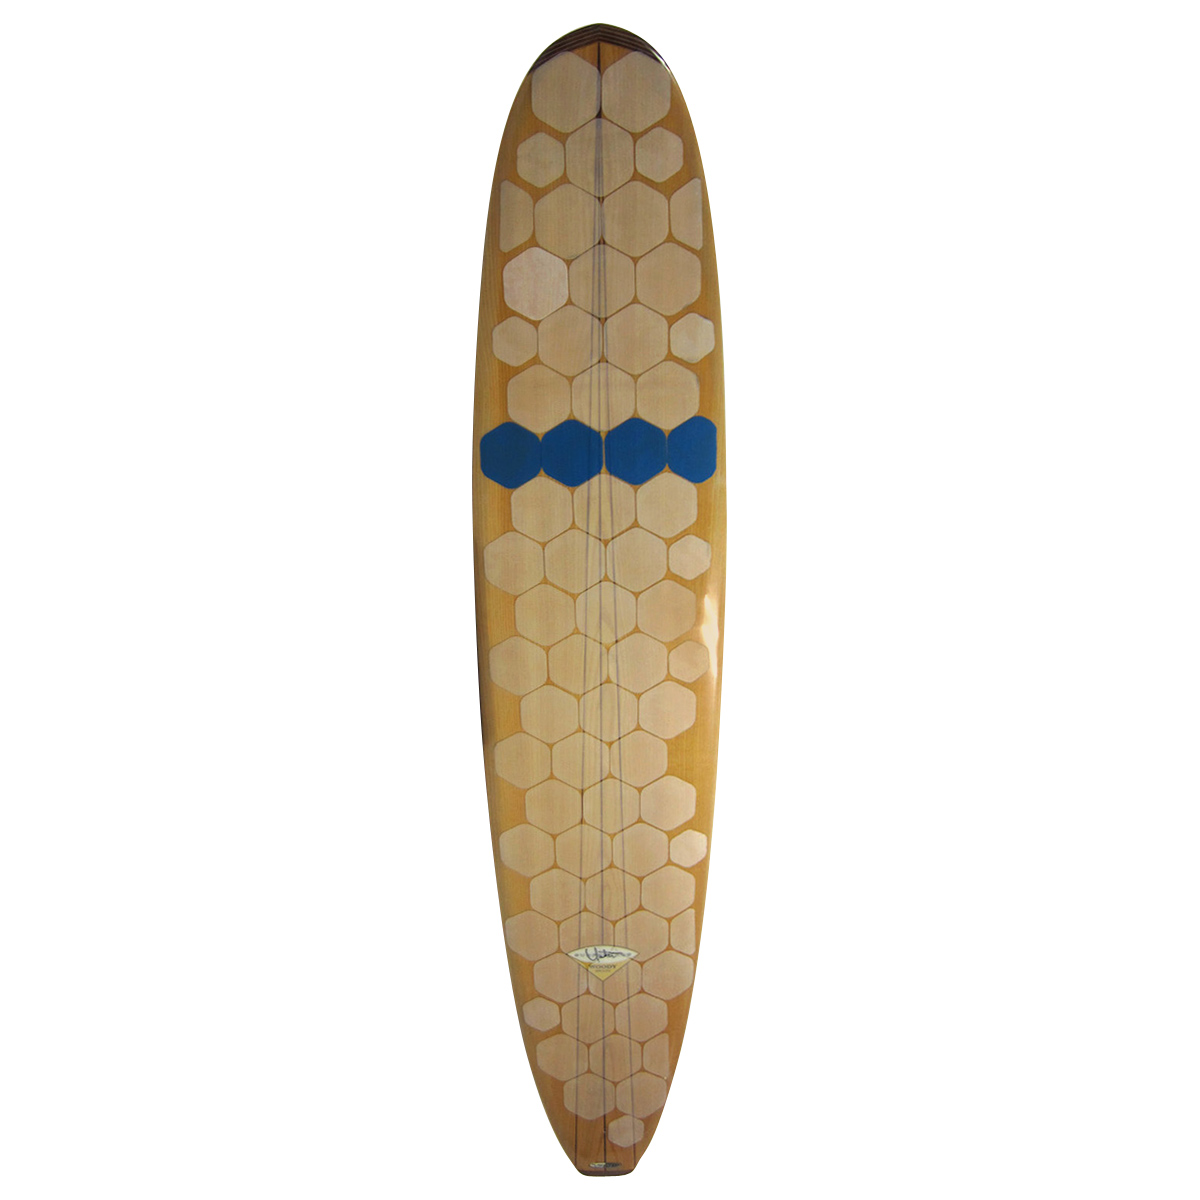  / YATER / 9`0 Spoon Woody Surftech